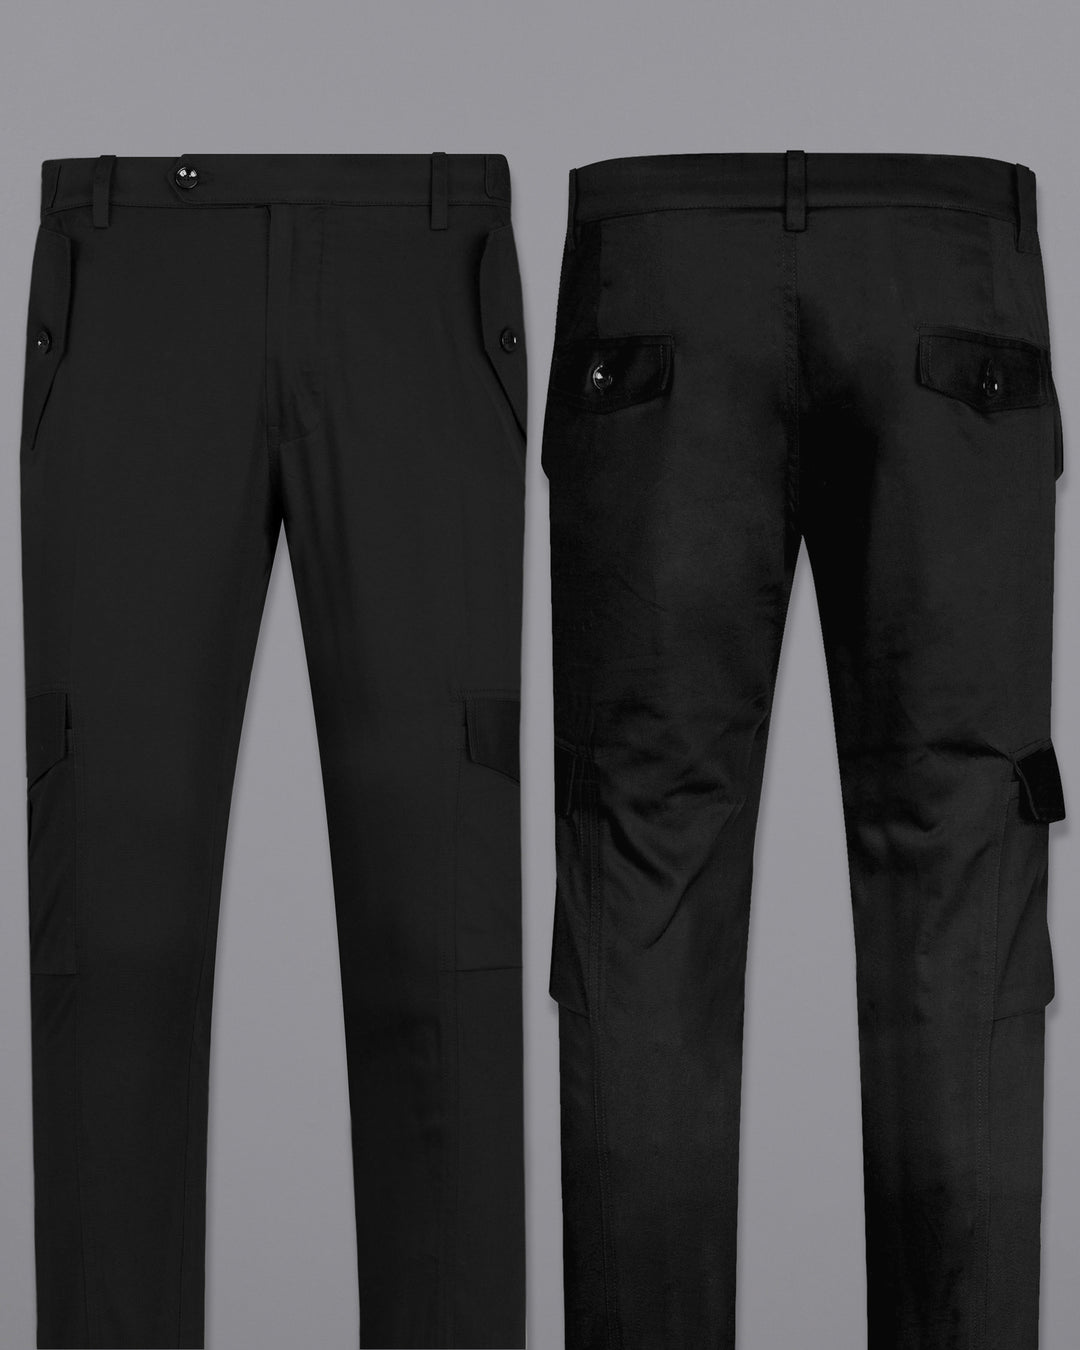 Buy Black Pants and Black Trousers Online at Best Prices  FRENCH CROWN